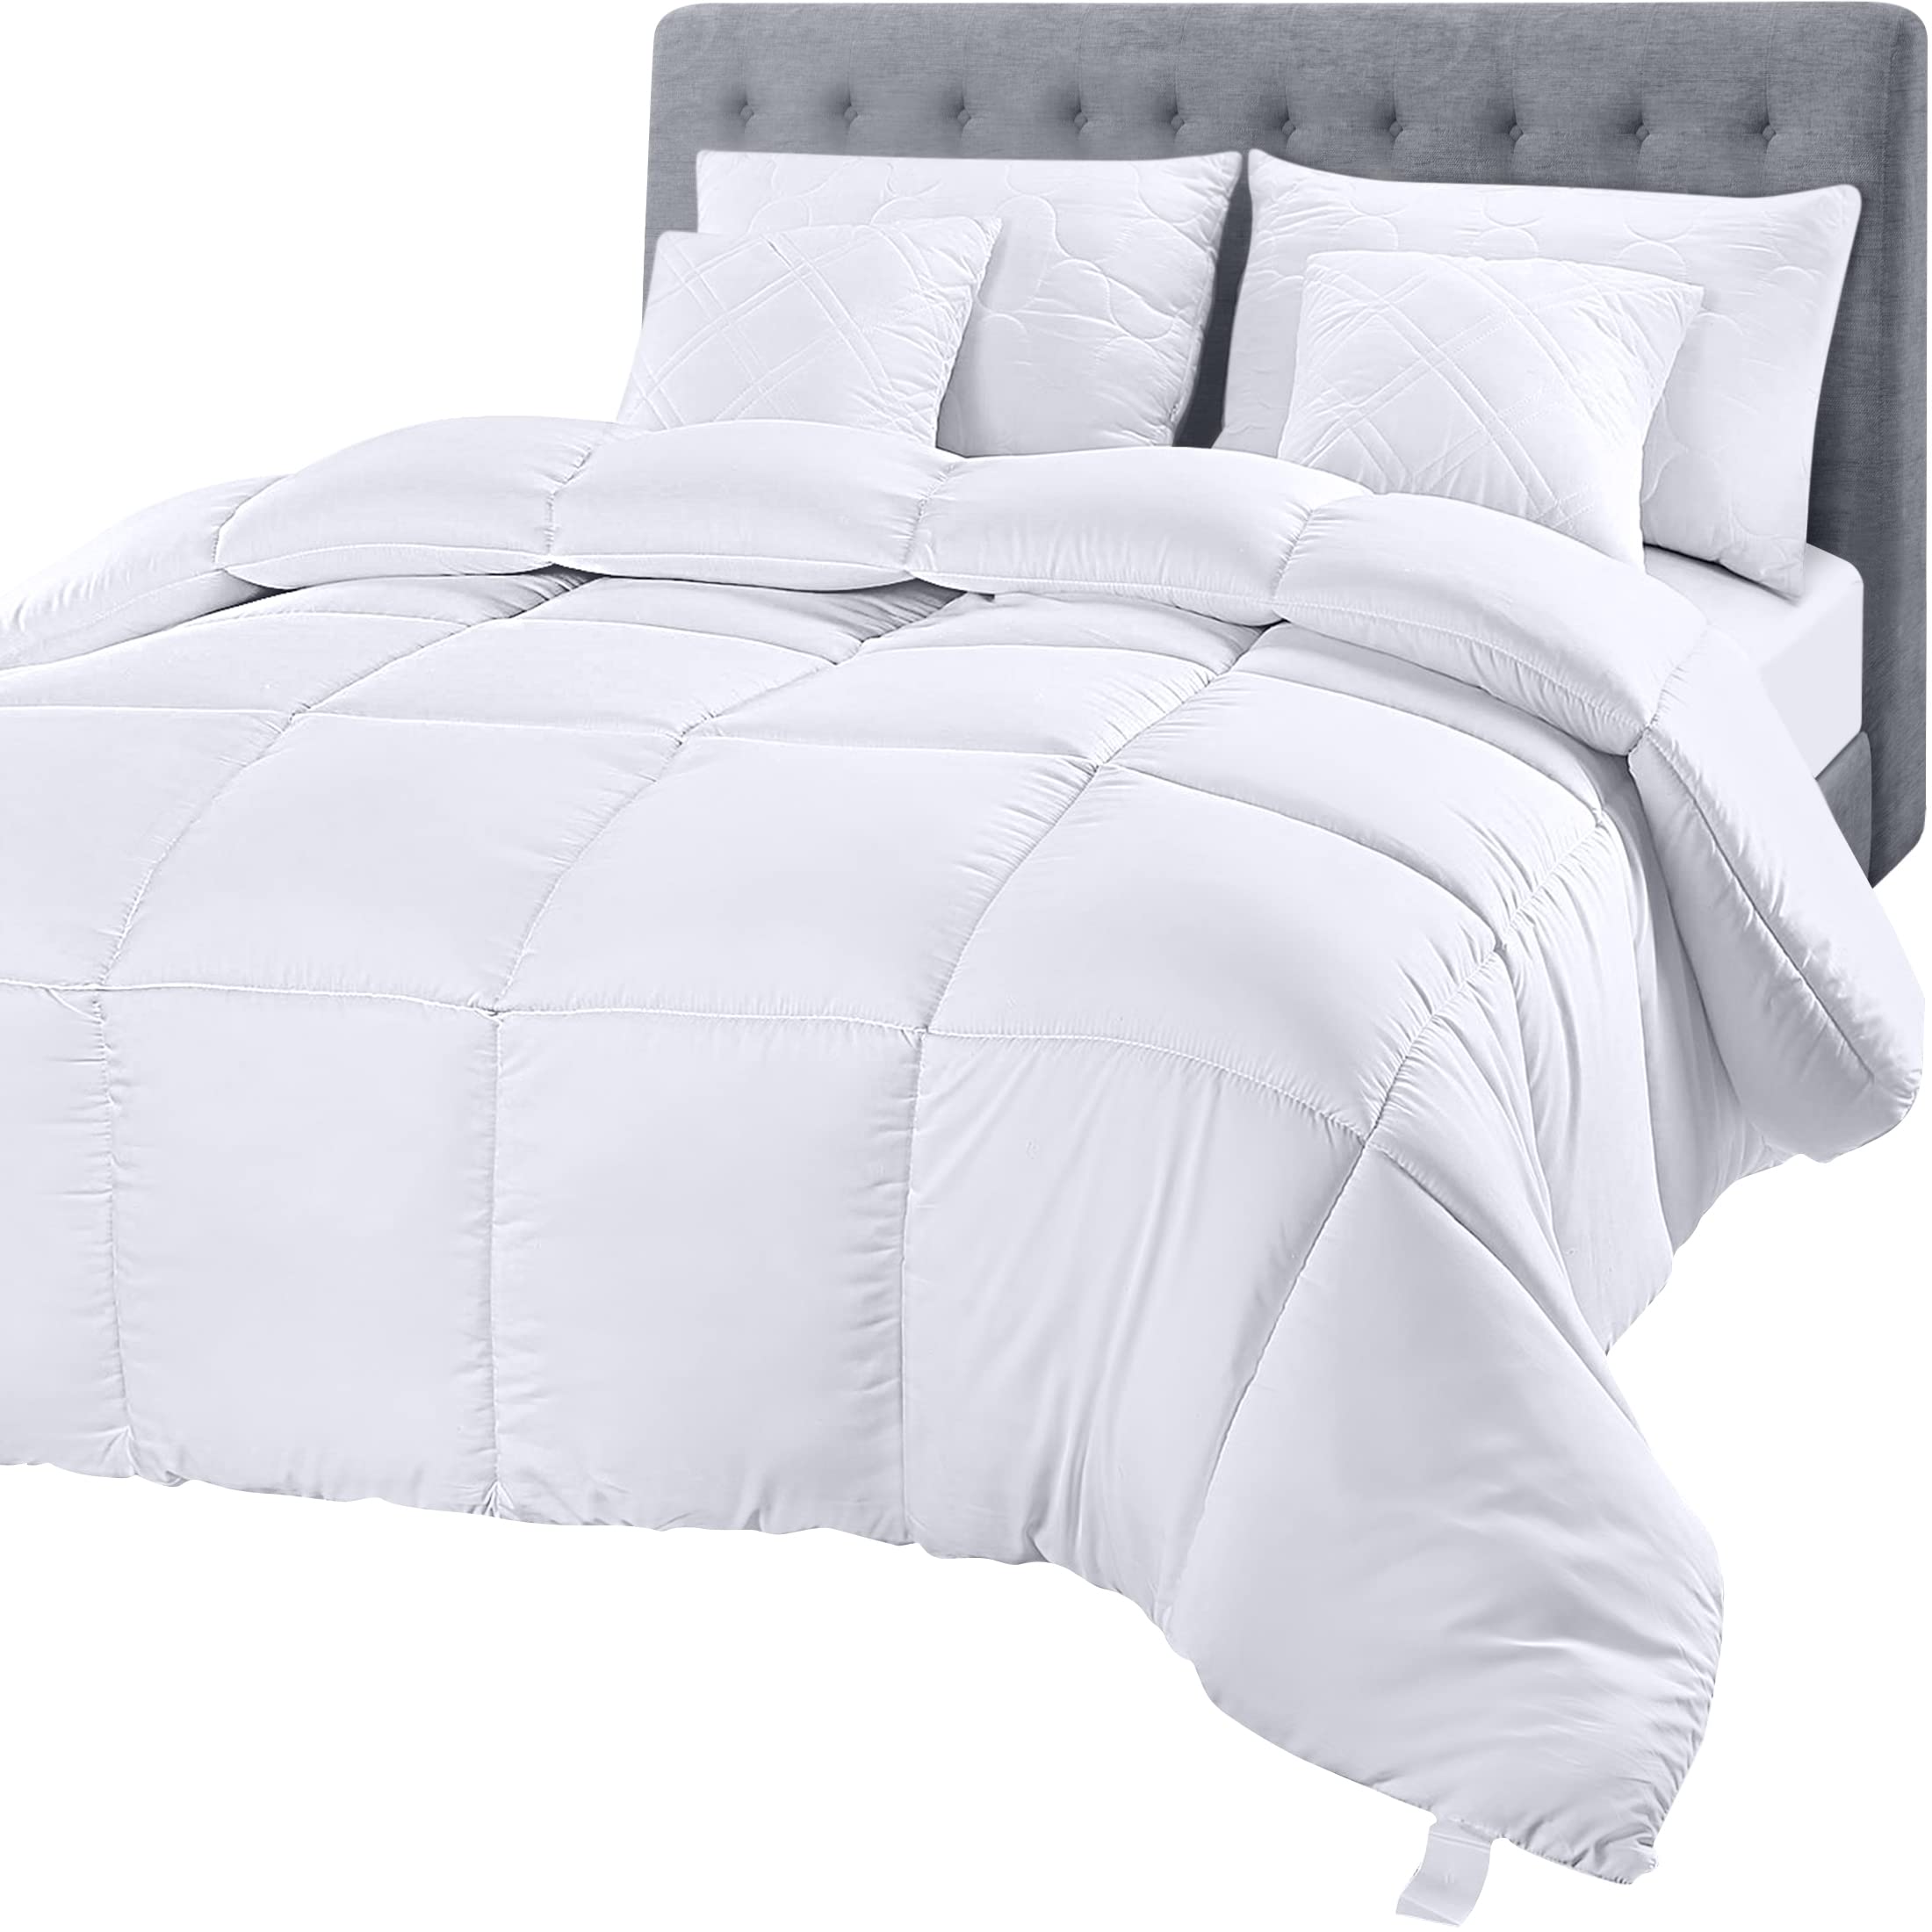 Book Cover Utopia Bedding Comforter Duvet Insert - Quilted Comforter with Corner Tabs - Box Stitched Down Alternative Comforter (Twin XL, White) Twin XL White